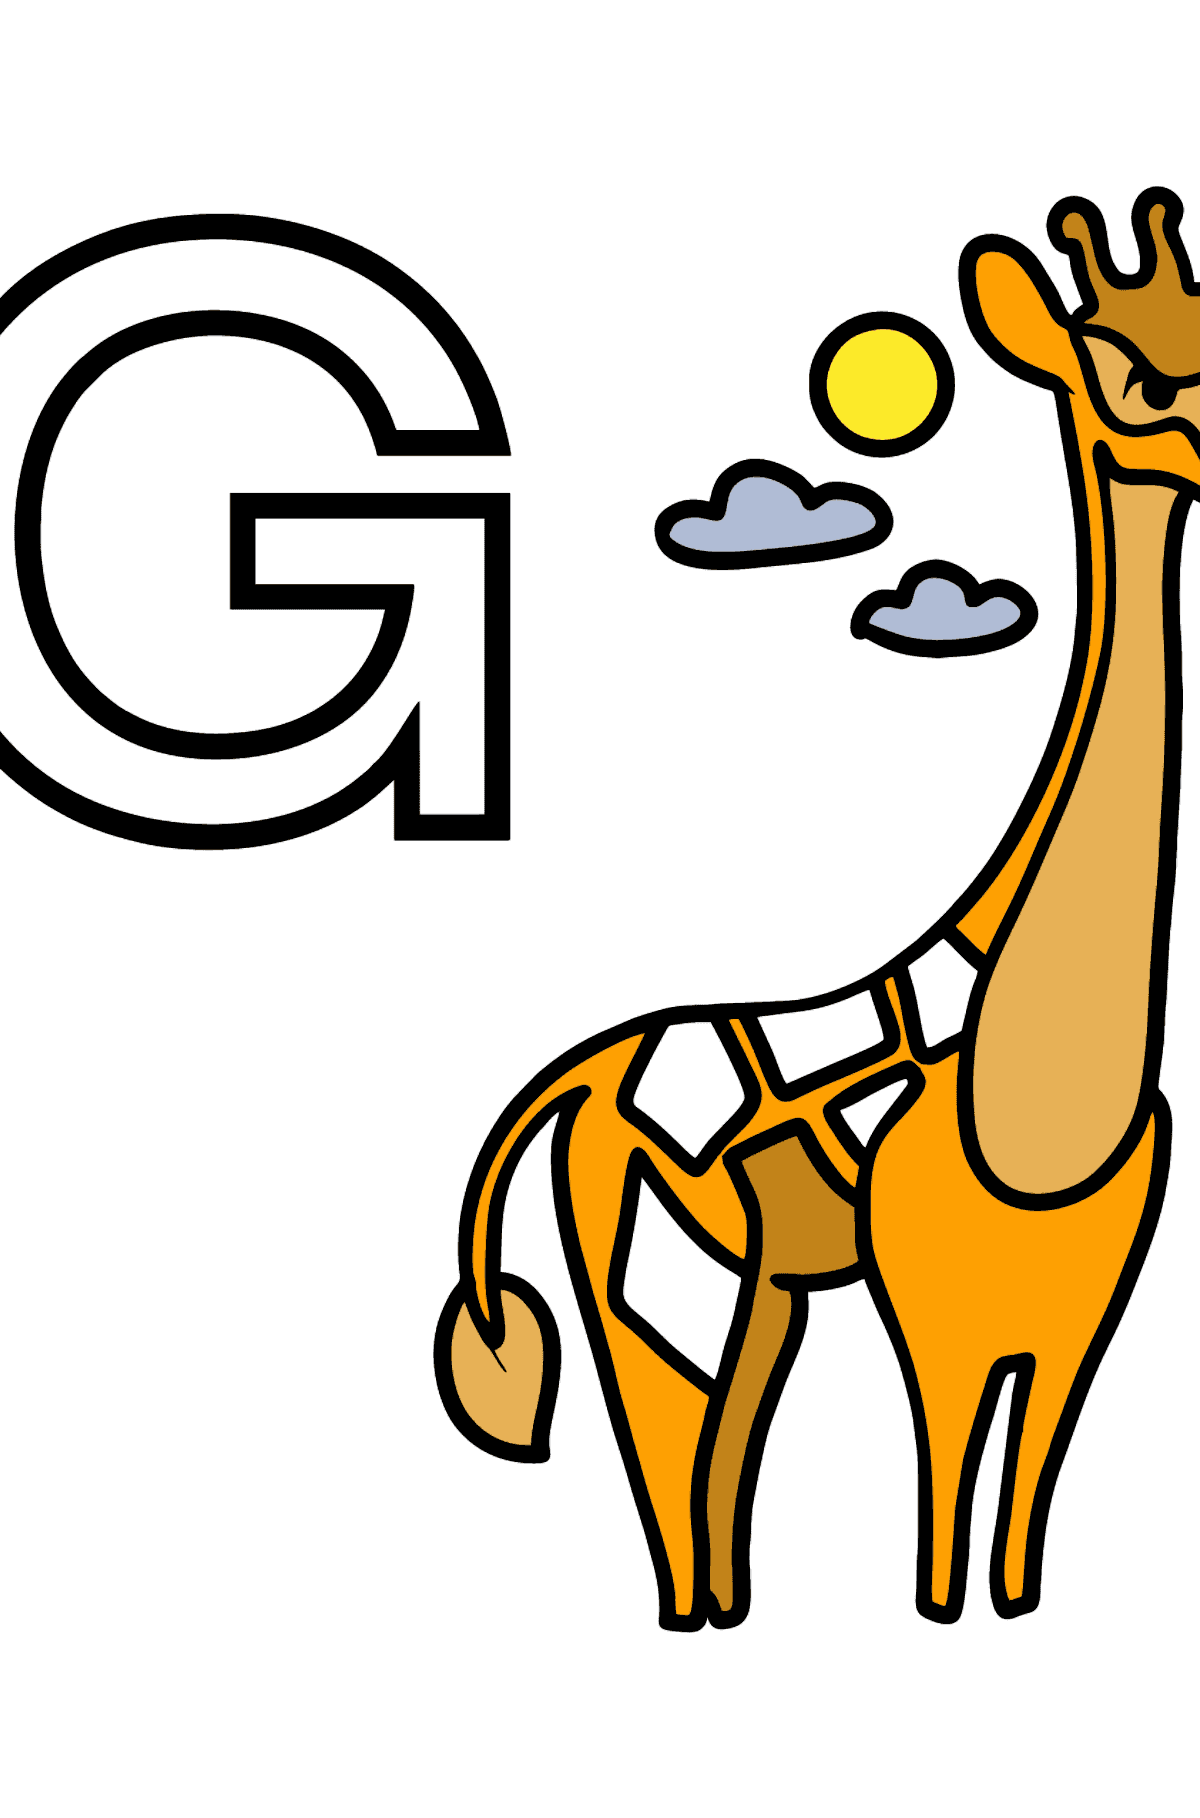 Portuguese Letter G coloring pages - GIRAFA - Coloring Pages for Kids